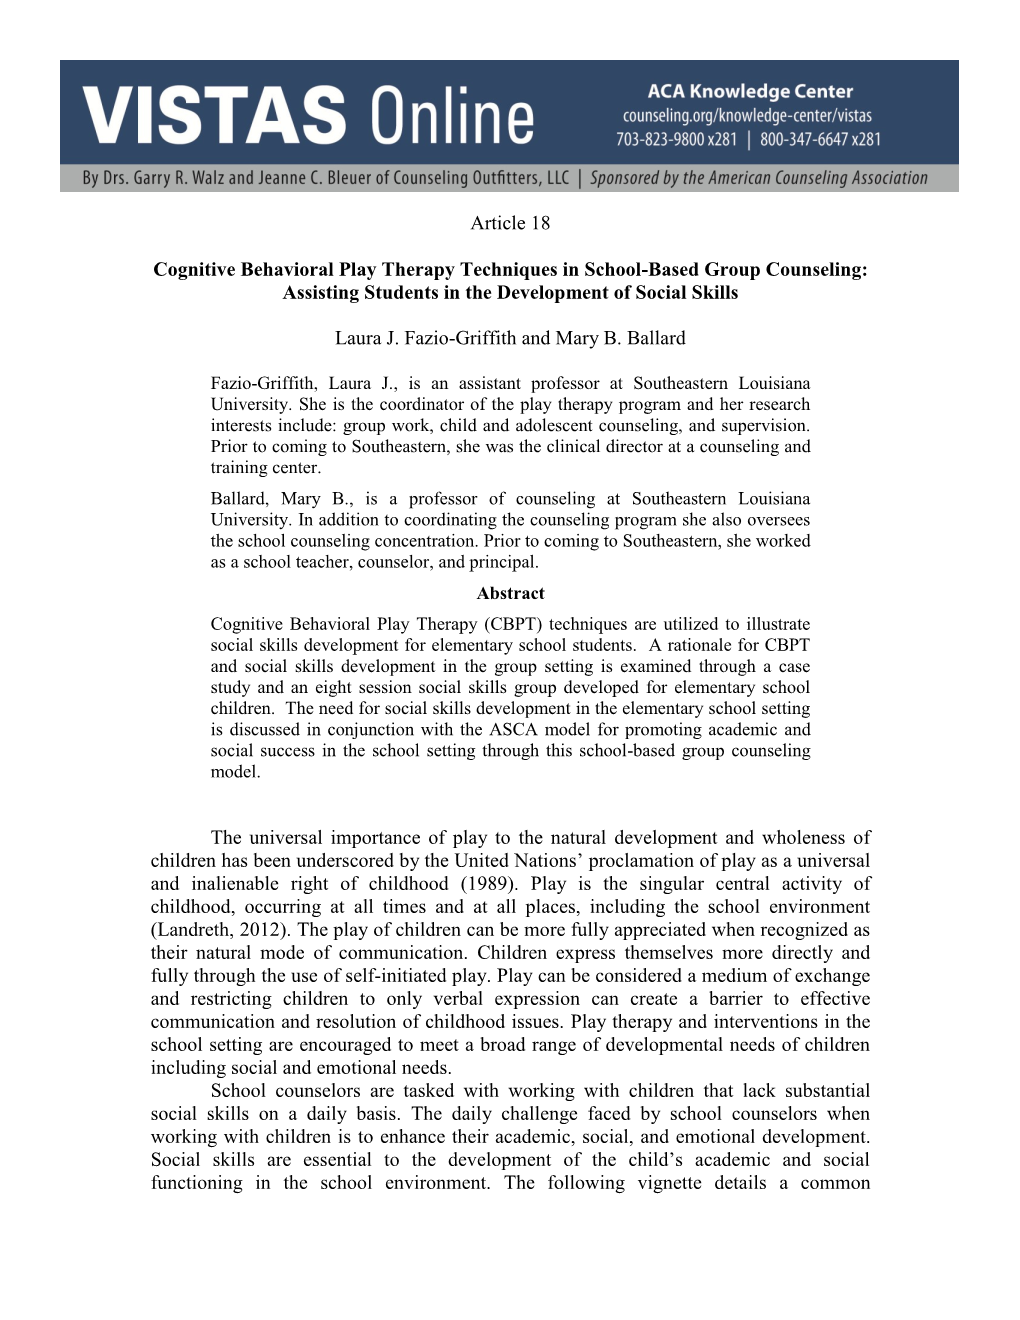 Cognitive Behavioral Play Therapy Techniques in School-Based Group Counseling: Assisting Students in the Development of Social Skills